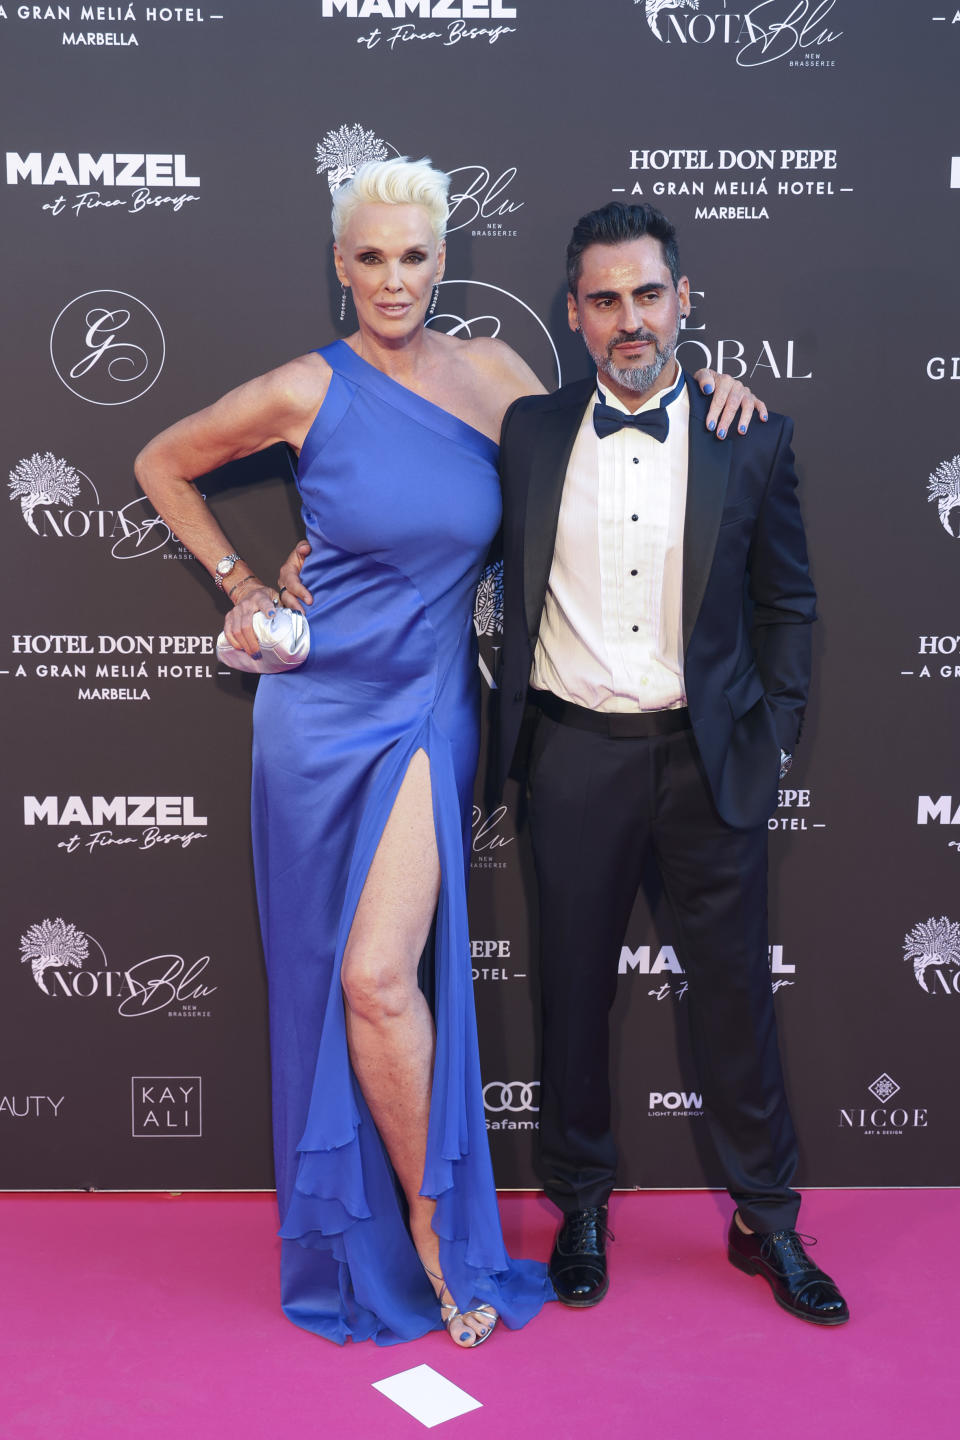 MARBELLA, SPAIN - JULY 24: Brigitte Nielsen and Mattia Dessi attend the Global Gift Gala Red Carpet at Hotel Don Pepe on July 24, 2023 in Marbella, Spain. (Photo by Daniel Perez/Getty Images)